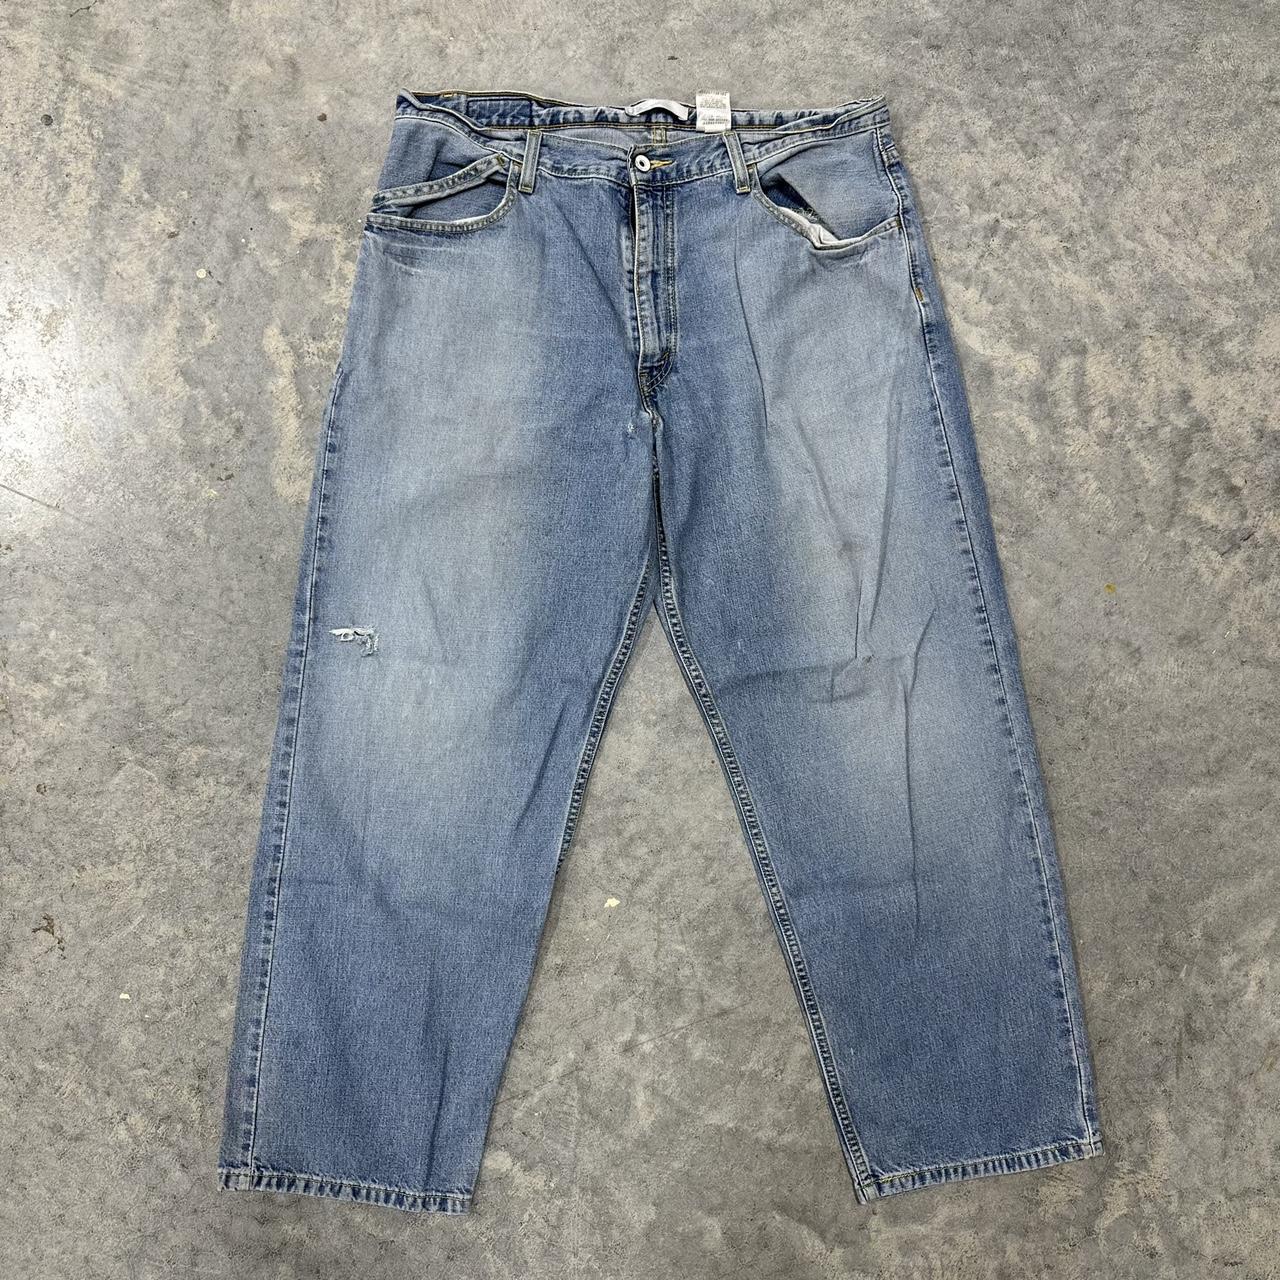 Early 2000s silver tab Levi’s jeans baggy loose fit... - Depop